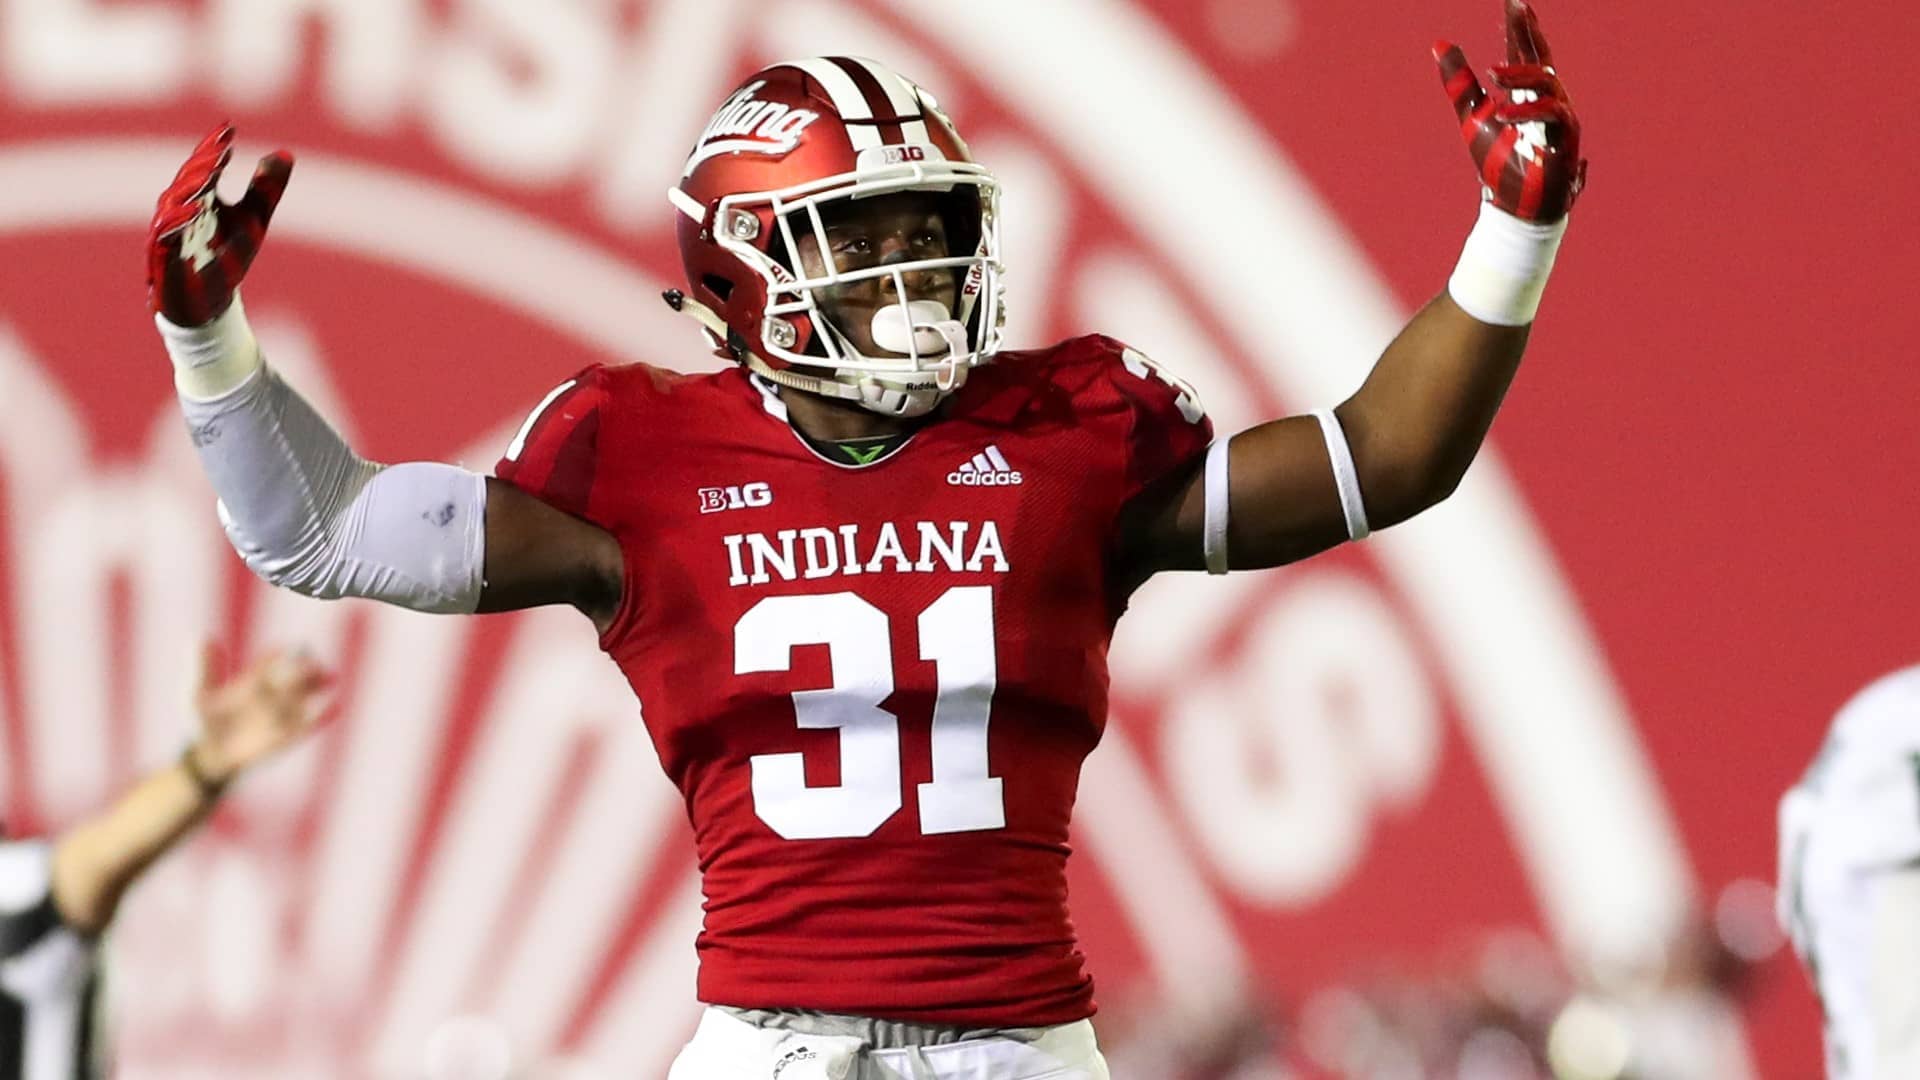 Indiana Hoosiers football player raising hands to hype up crowd